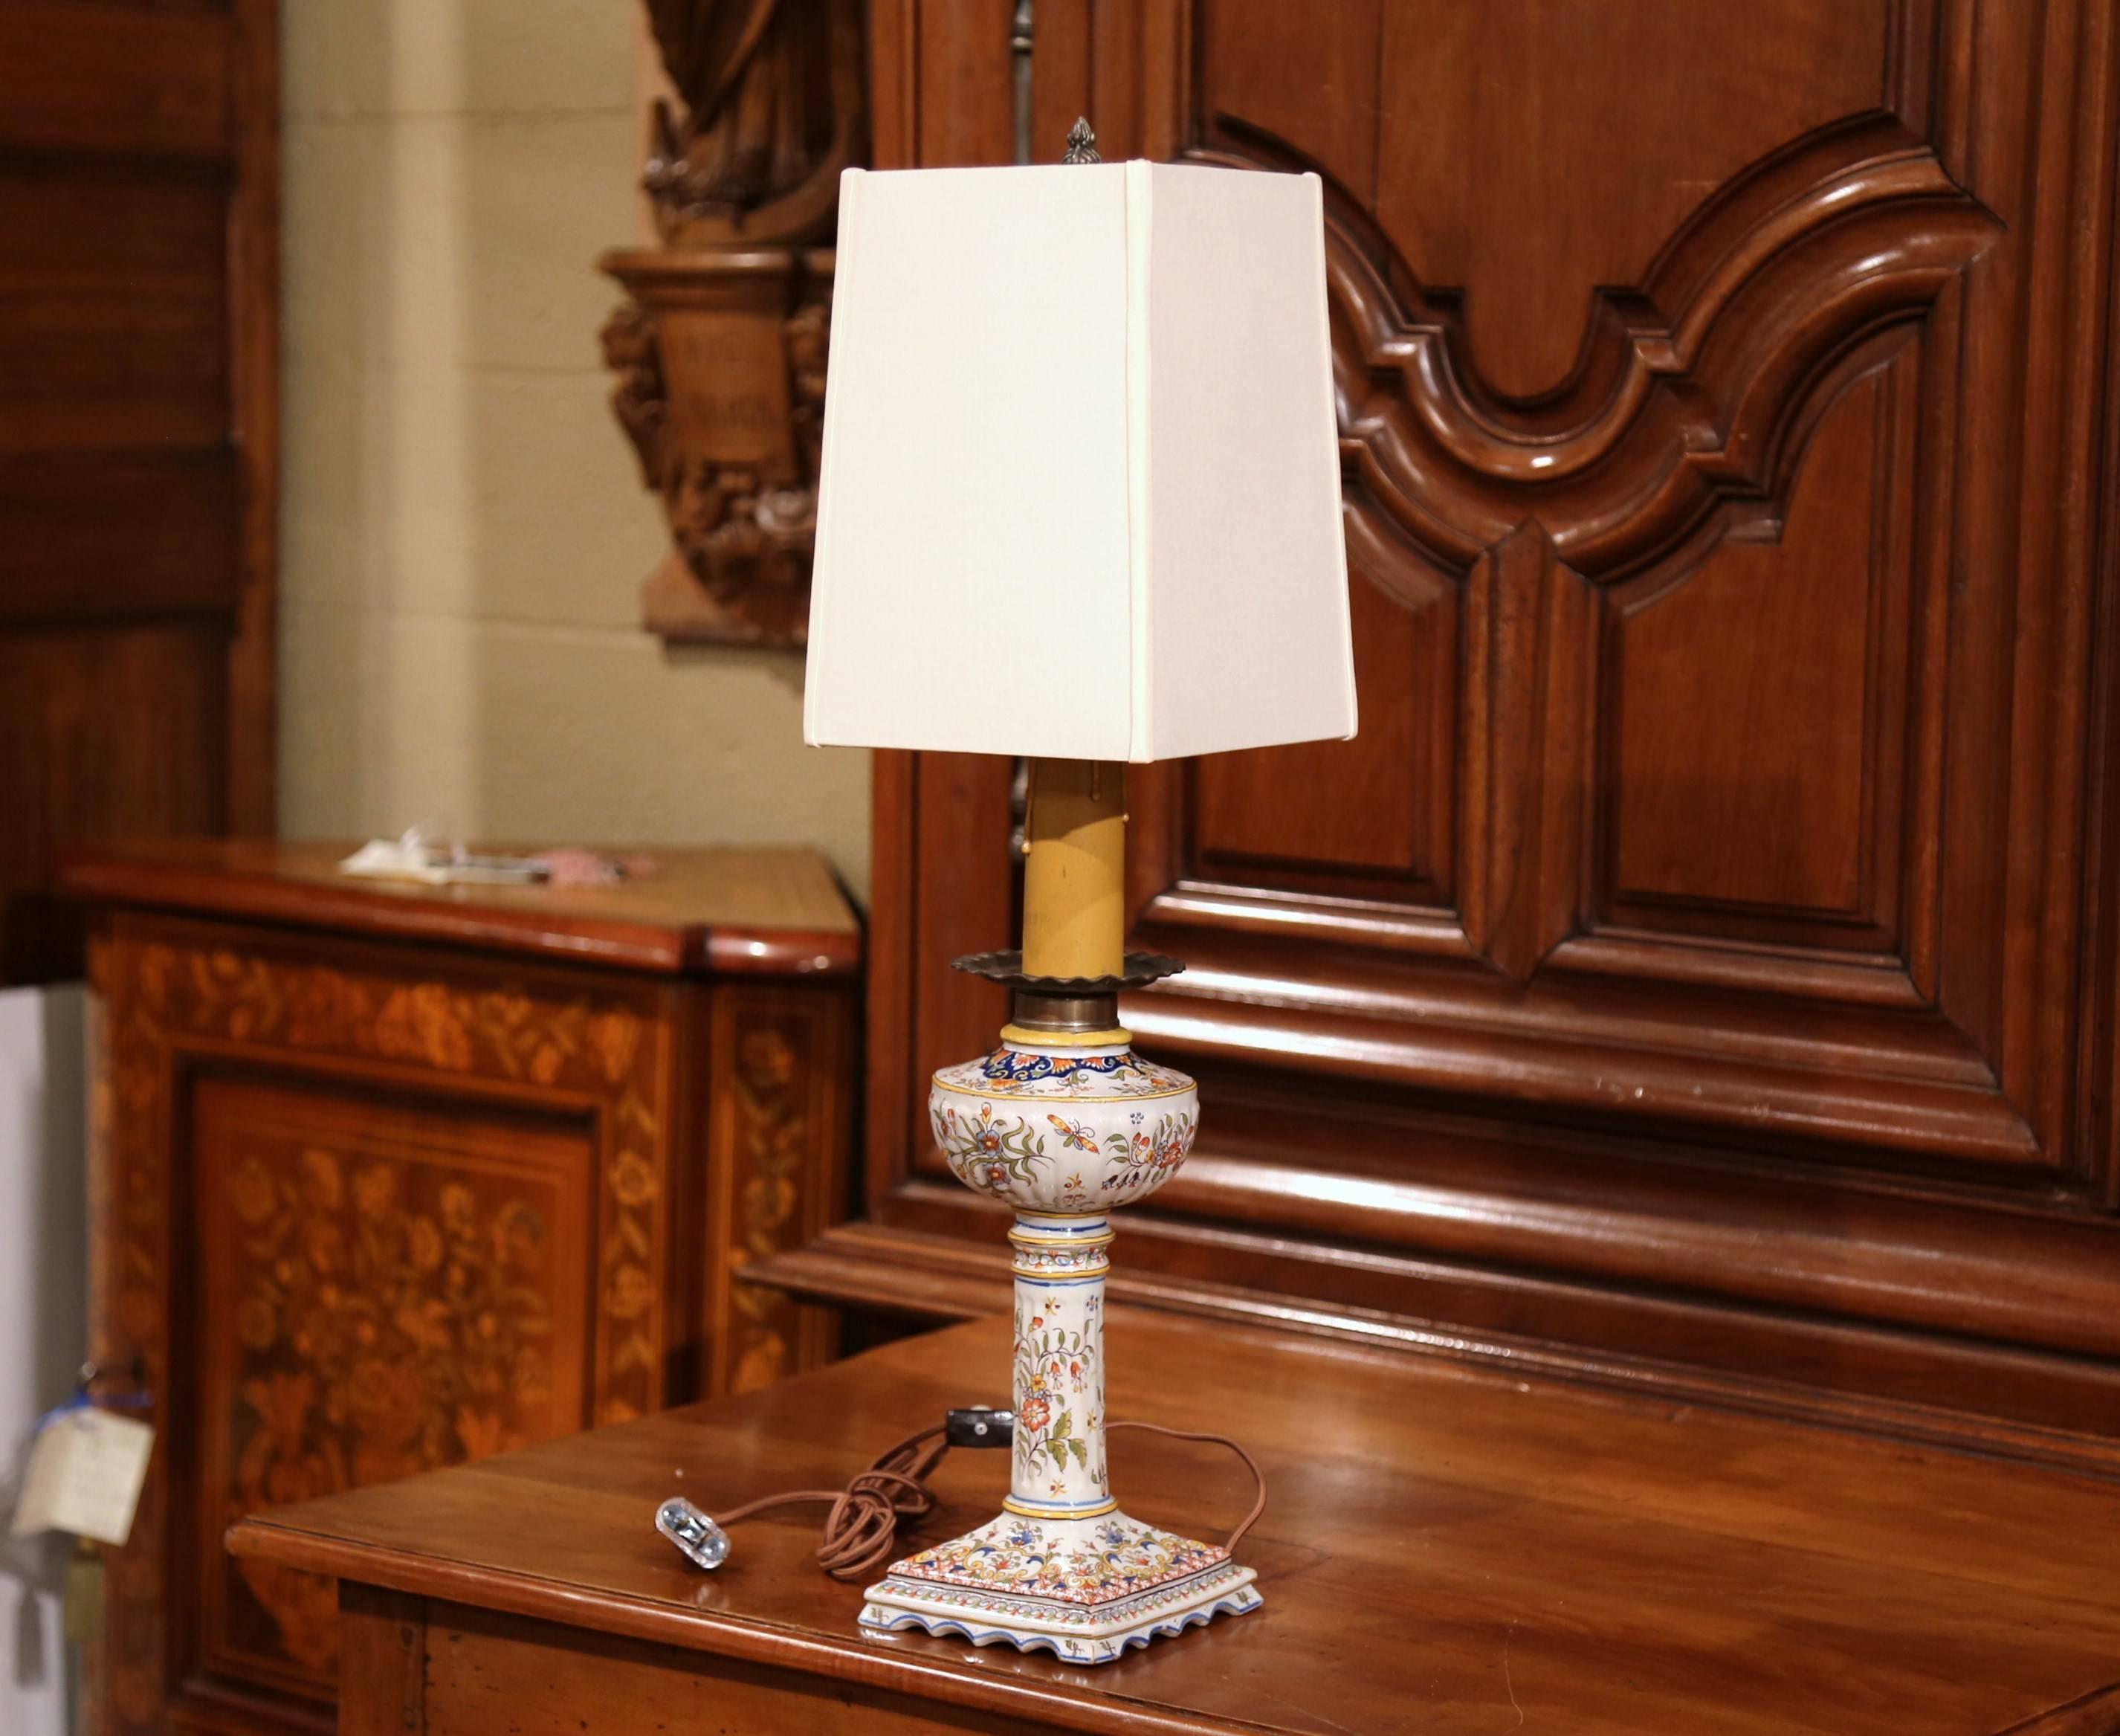 This elegant, antique table lamp was crafted in Prefailles on the west coast of France, circa 1880. The colorful 